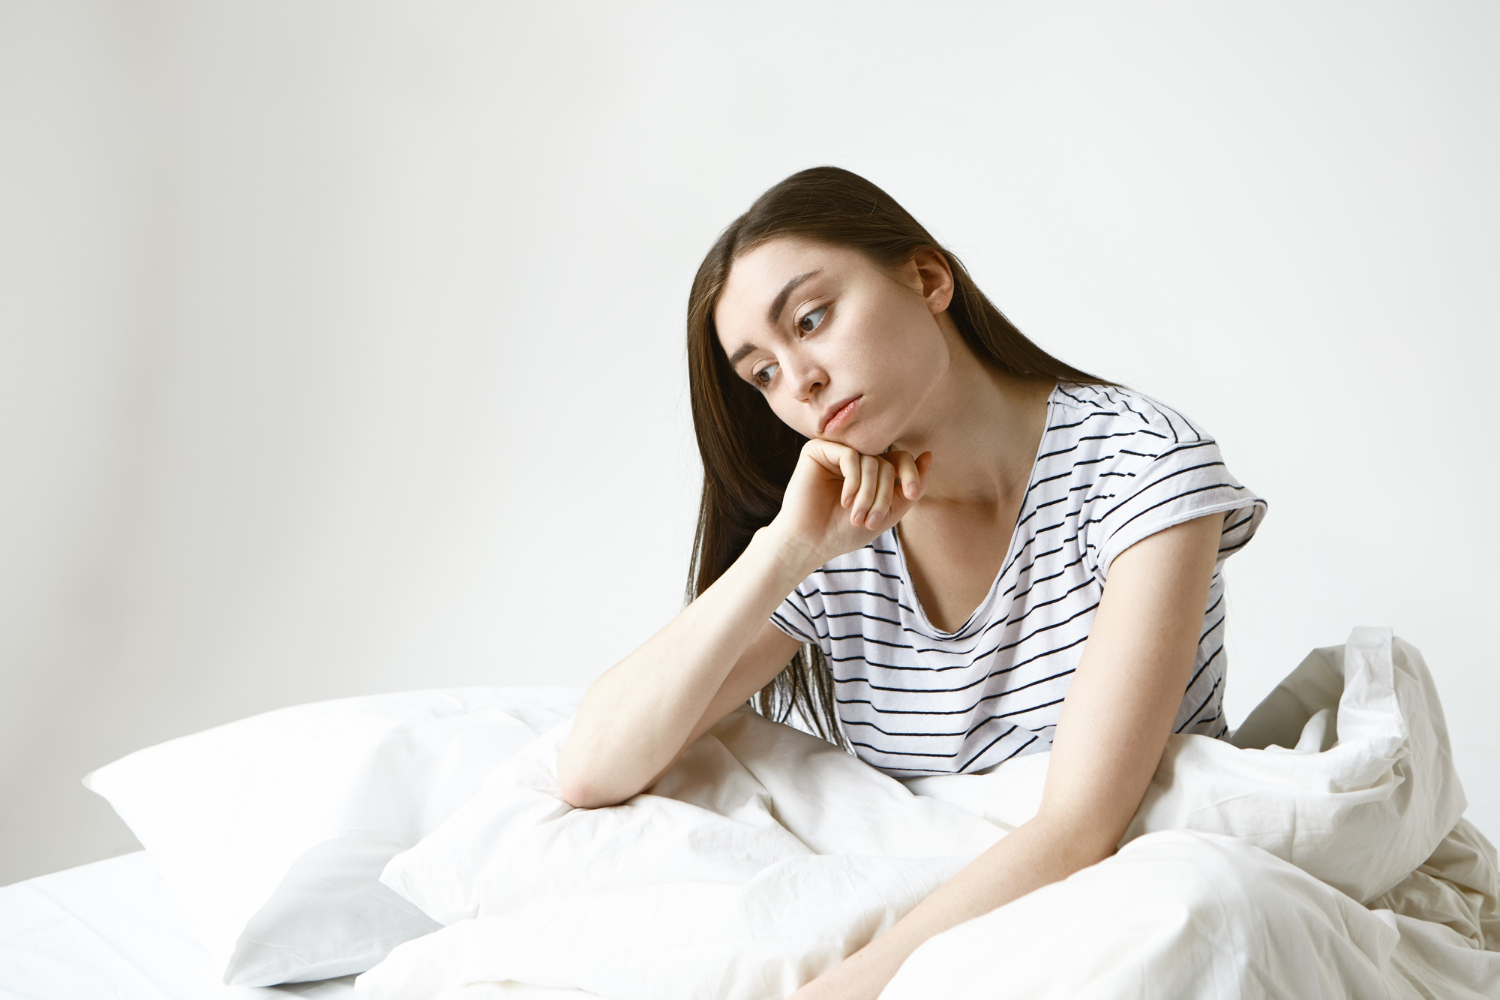 Coping With Insomnia And Why Does It Happen?